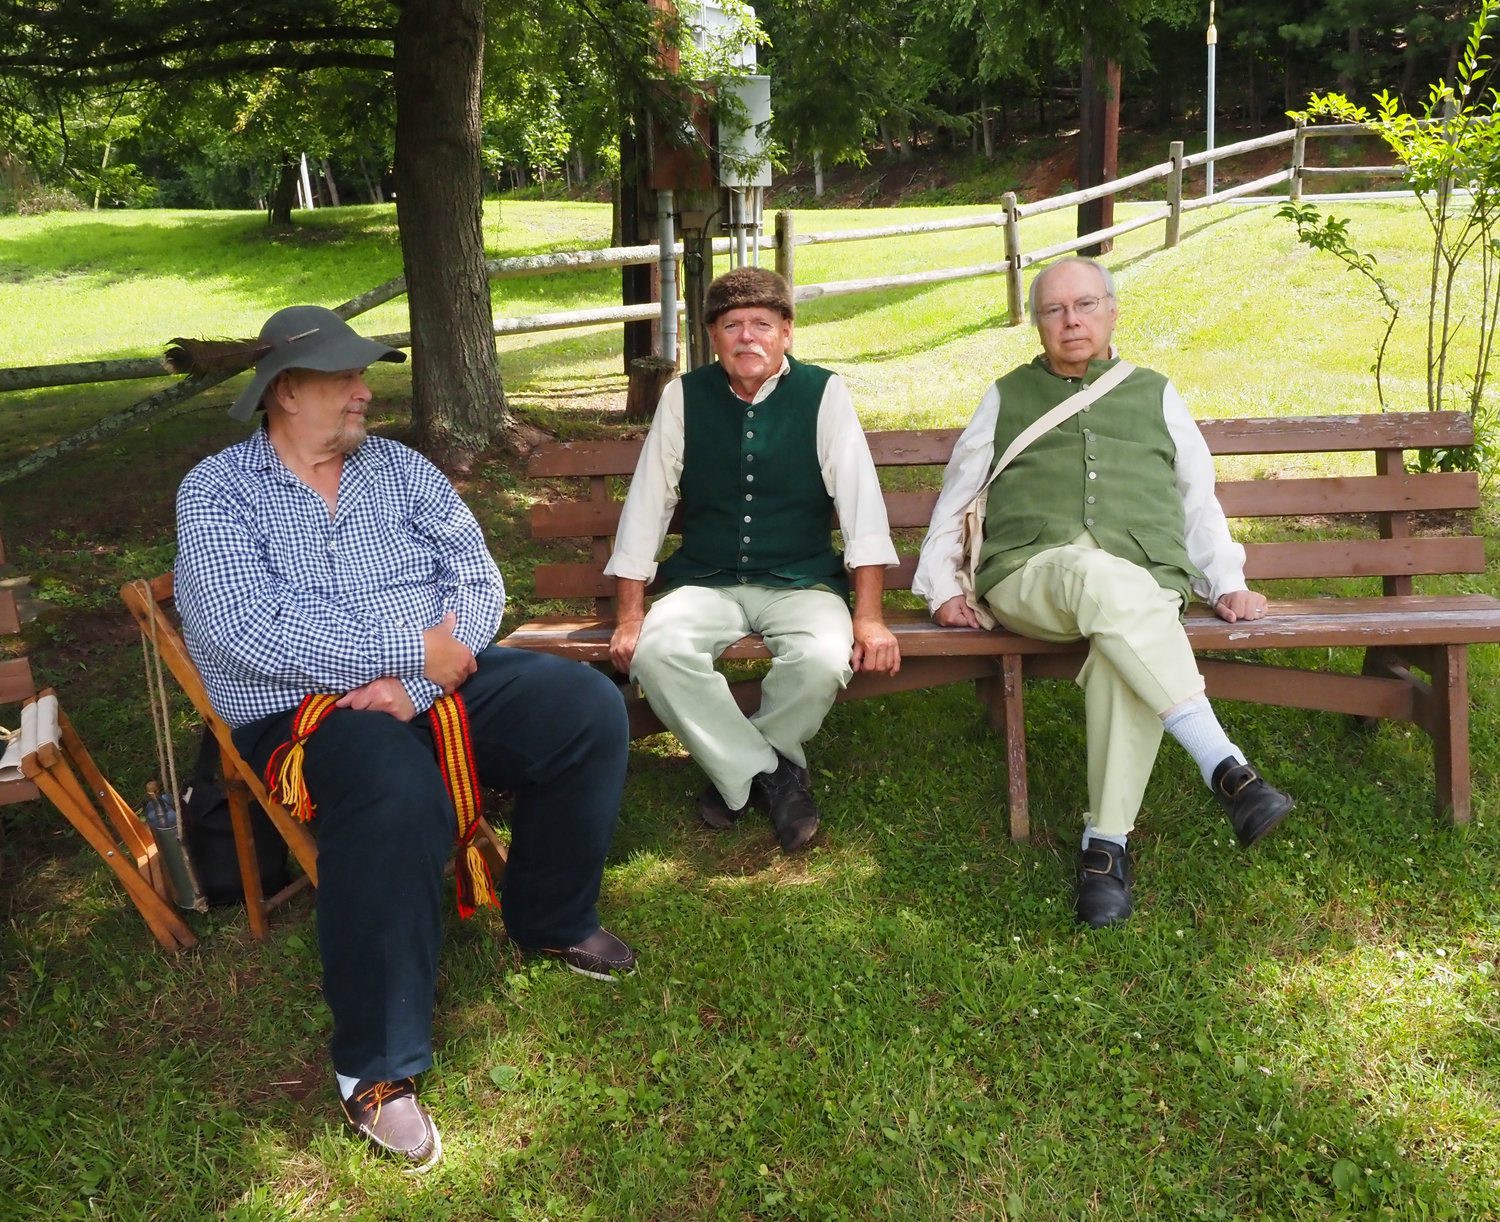 Left to right, Rick Gyarmati of Roland, PA, Dennis Bernitt of Hankins, and Joe Lansing of Liberty, Civil War re-enactors with Company K of the 143rd NY Volunteers, supplied the mortar report for the grand finale.